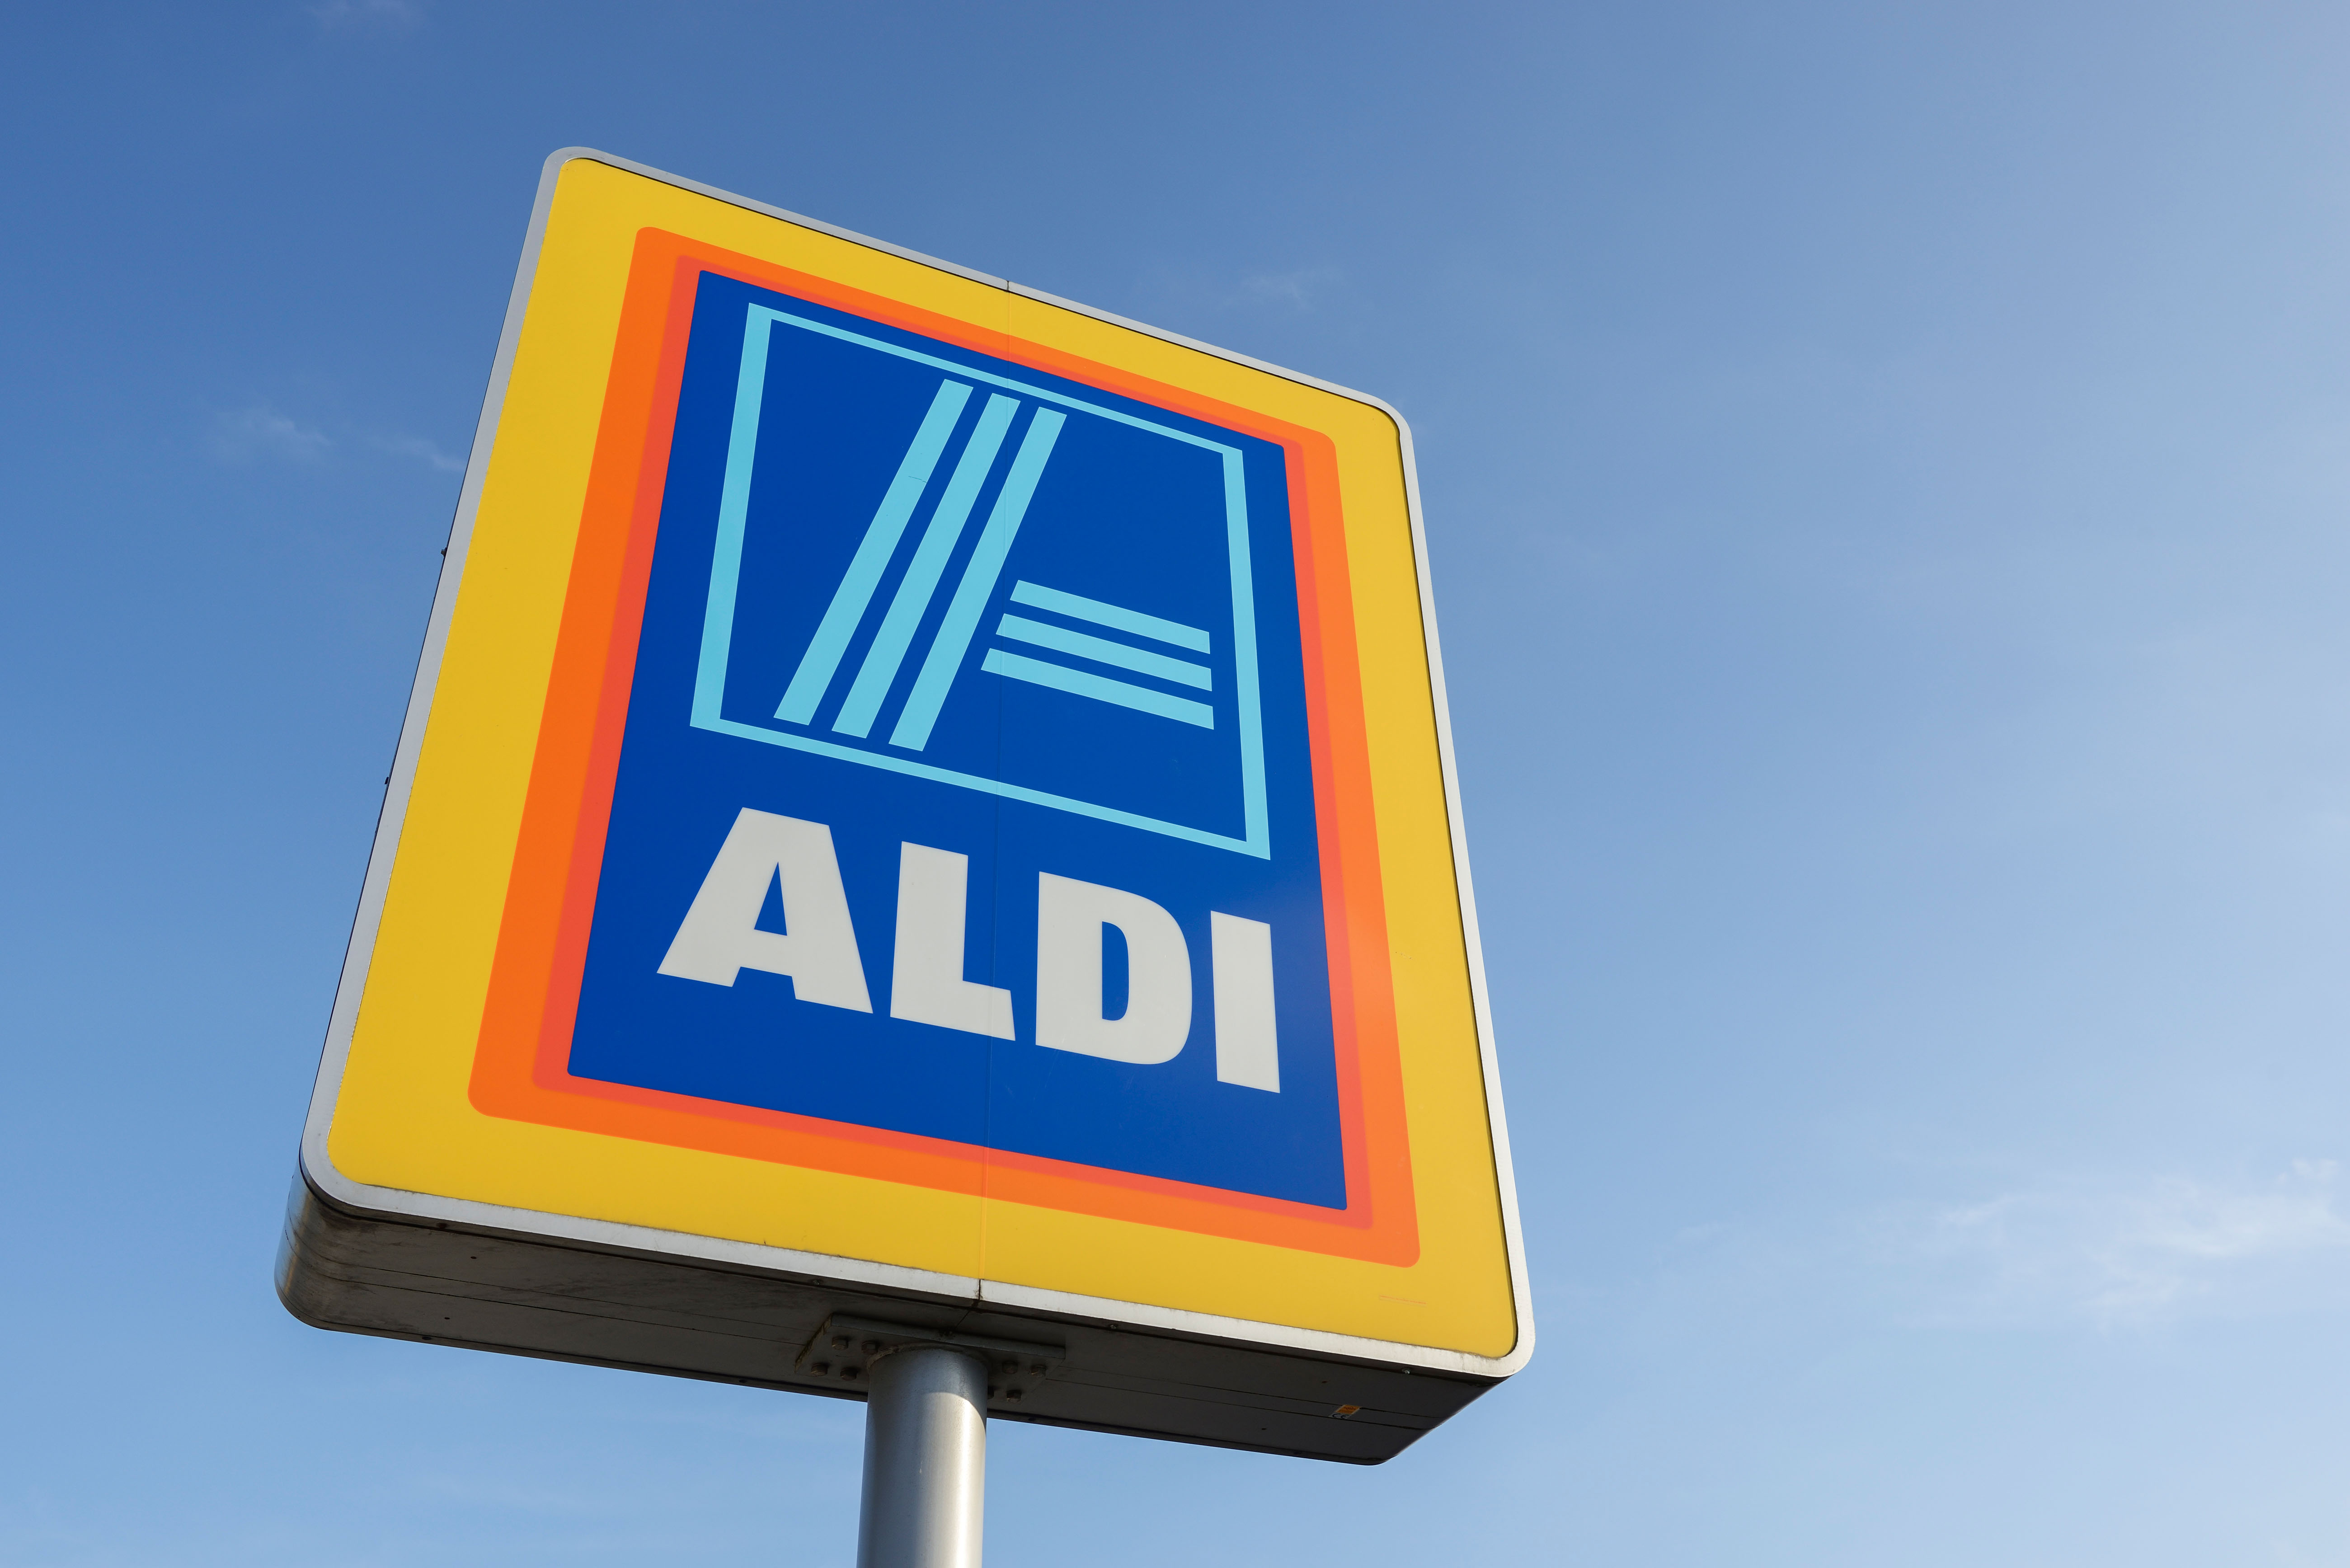 Supermarket giant Aldi has launched an appeal for hundreds of new employees